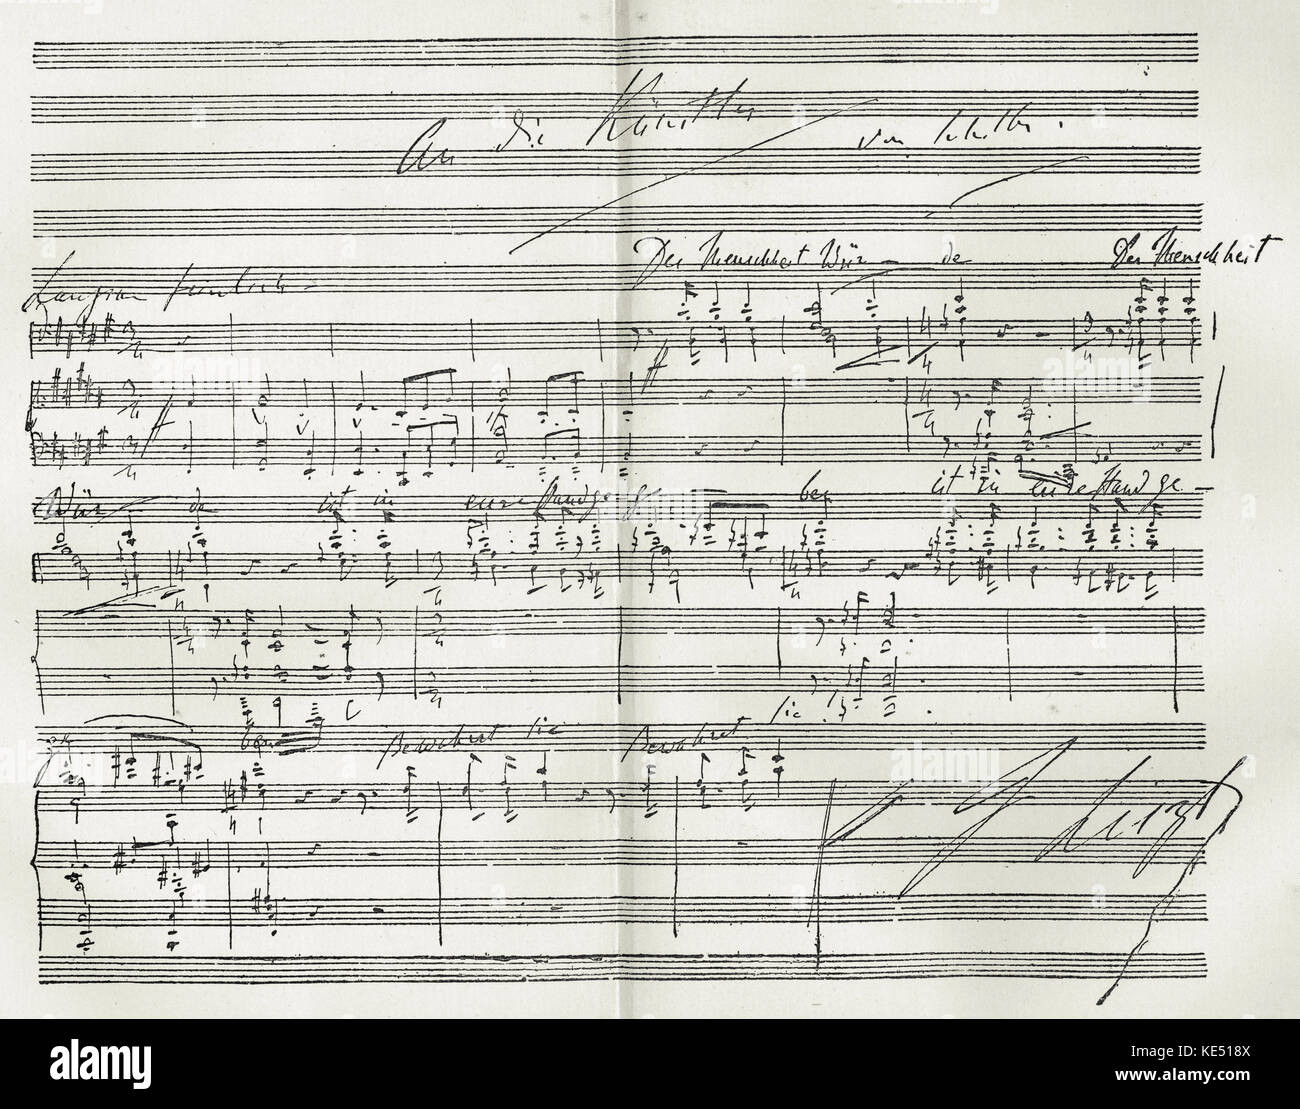 Franz Liszt  score for Friedrich Schiller 's poem 'An die Künstler' (To the Artists). Hand written and signed by the composer. FS:,German poet: 10 November 1759 -  9 May 1805.  FL Hungarian pianist and composer,  22 October 1811 - 31 July 1886. Stock Photo